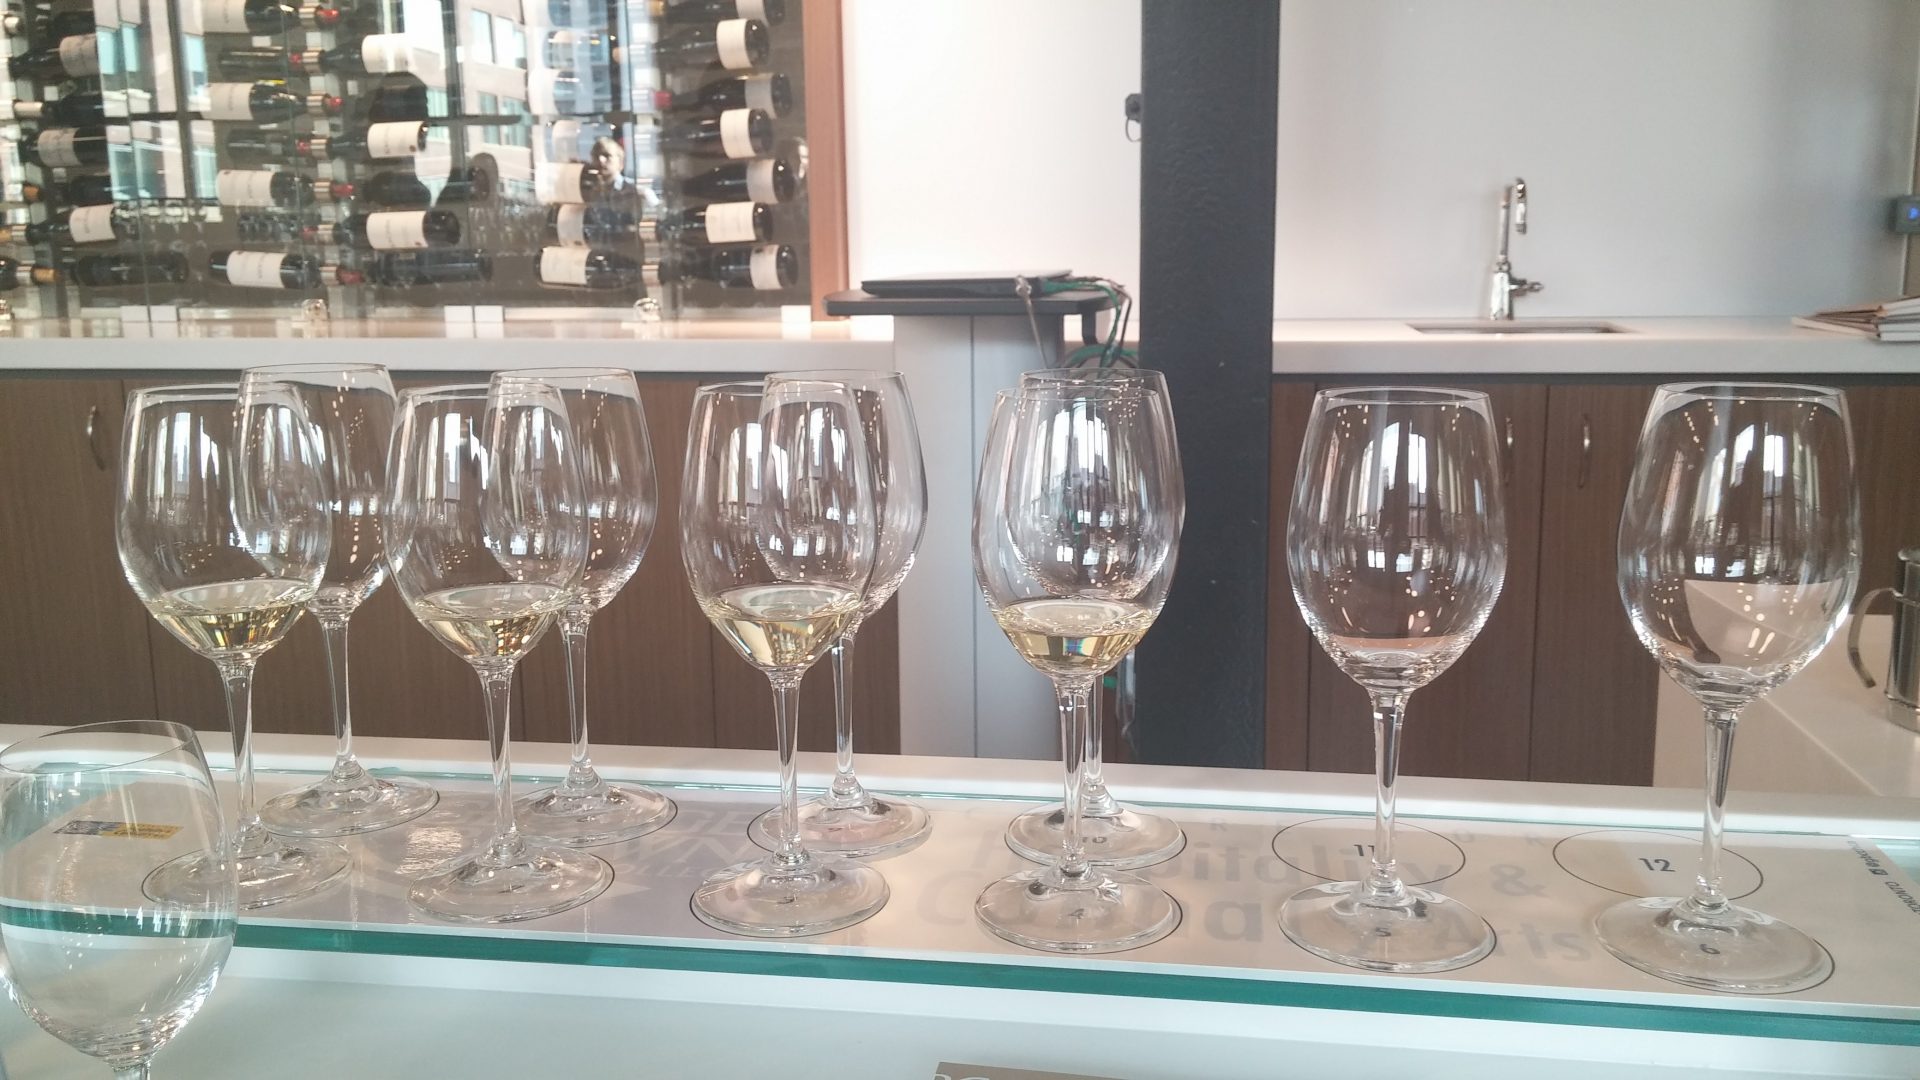 A comparative tasting of Burgundian wine, the perfect way to spend a day.